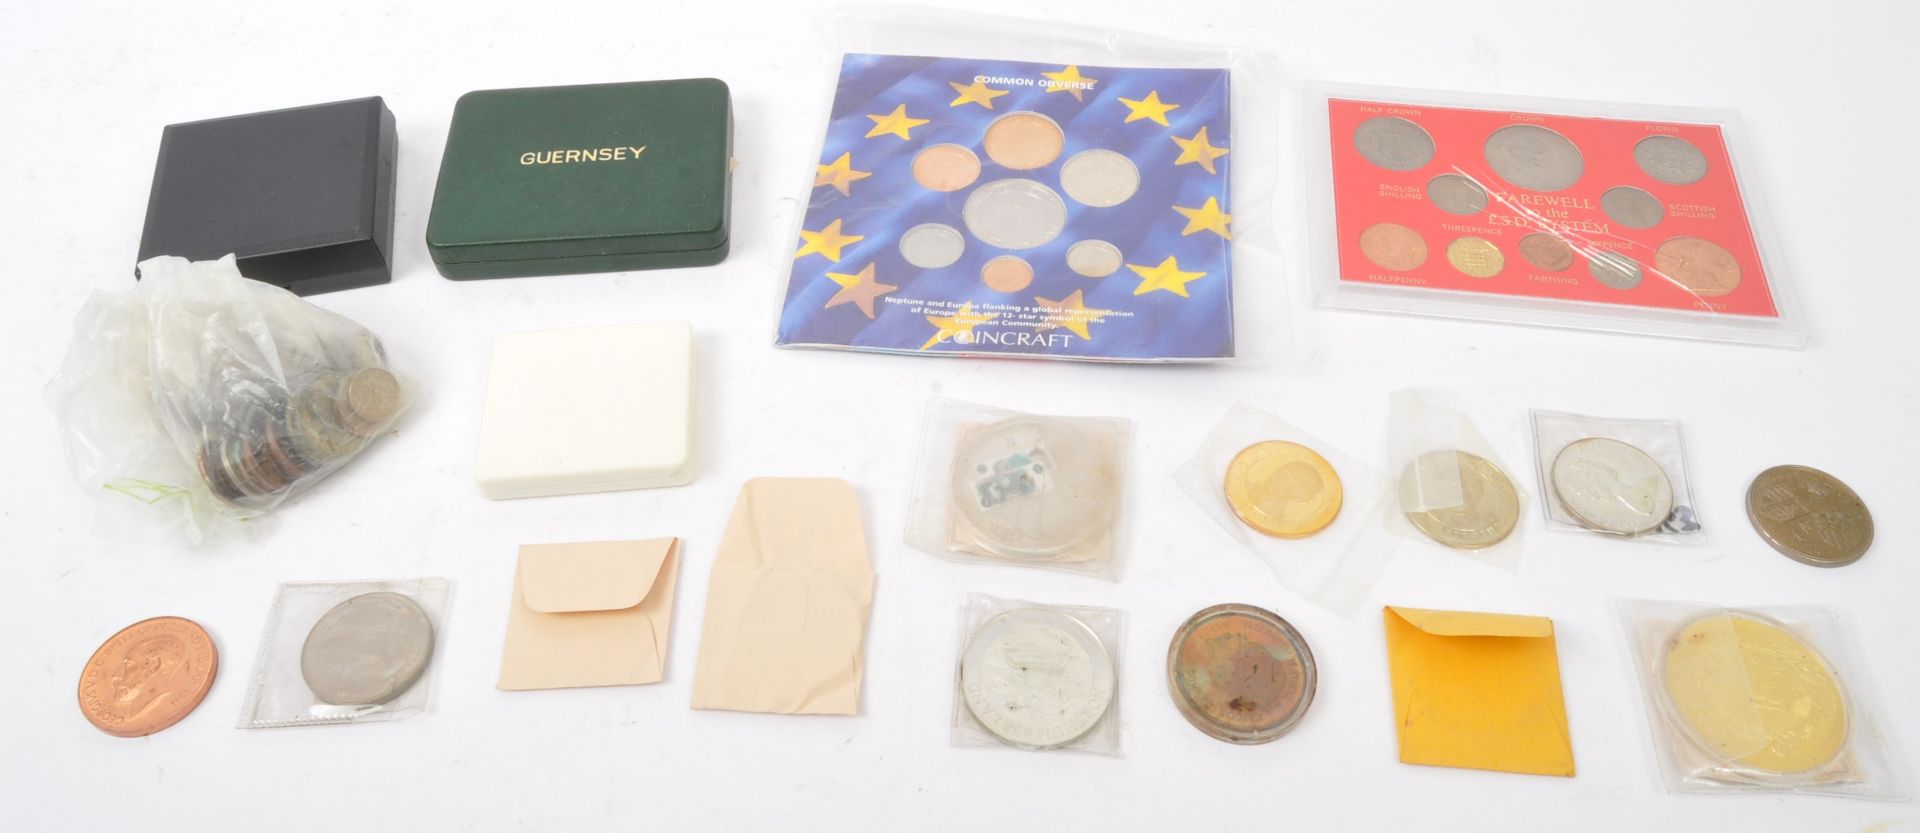 COLLECTION OF VINTAGE COMMEMORATIVE UK COIN SETS